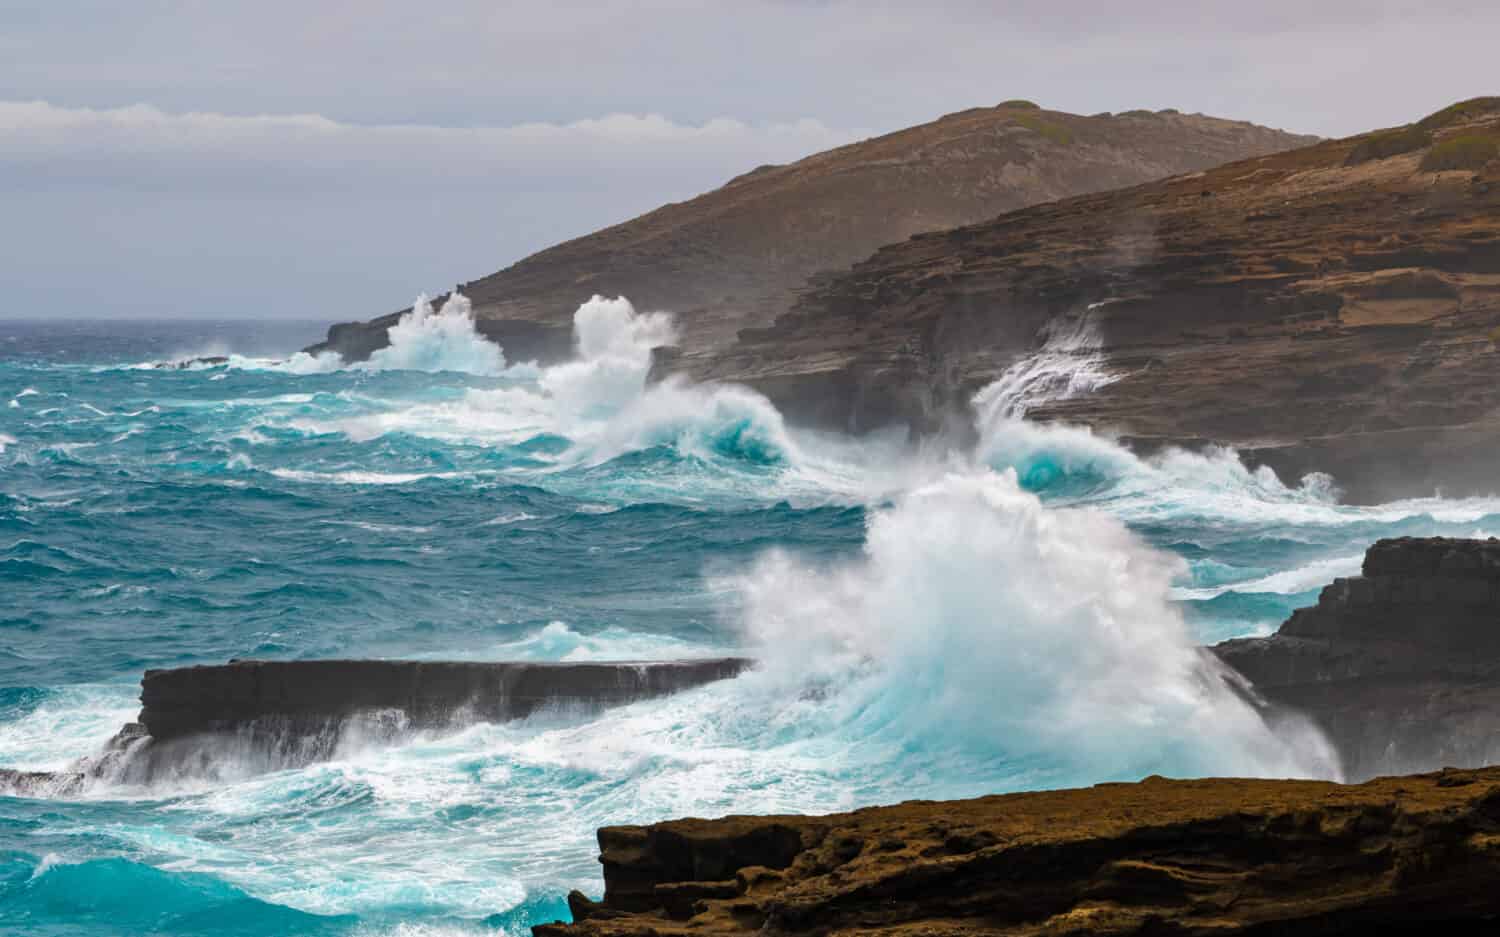 rough seas around the cliffs of east Oahu, Hawaii during the approach of Hurricane Lane on August 24, 2018